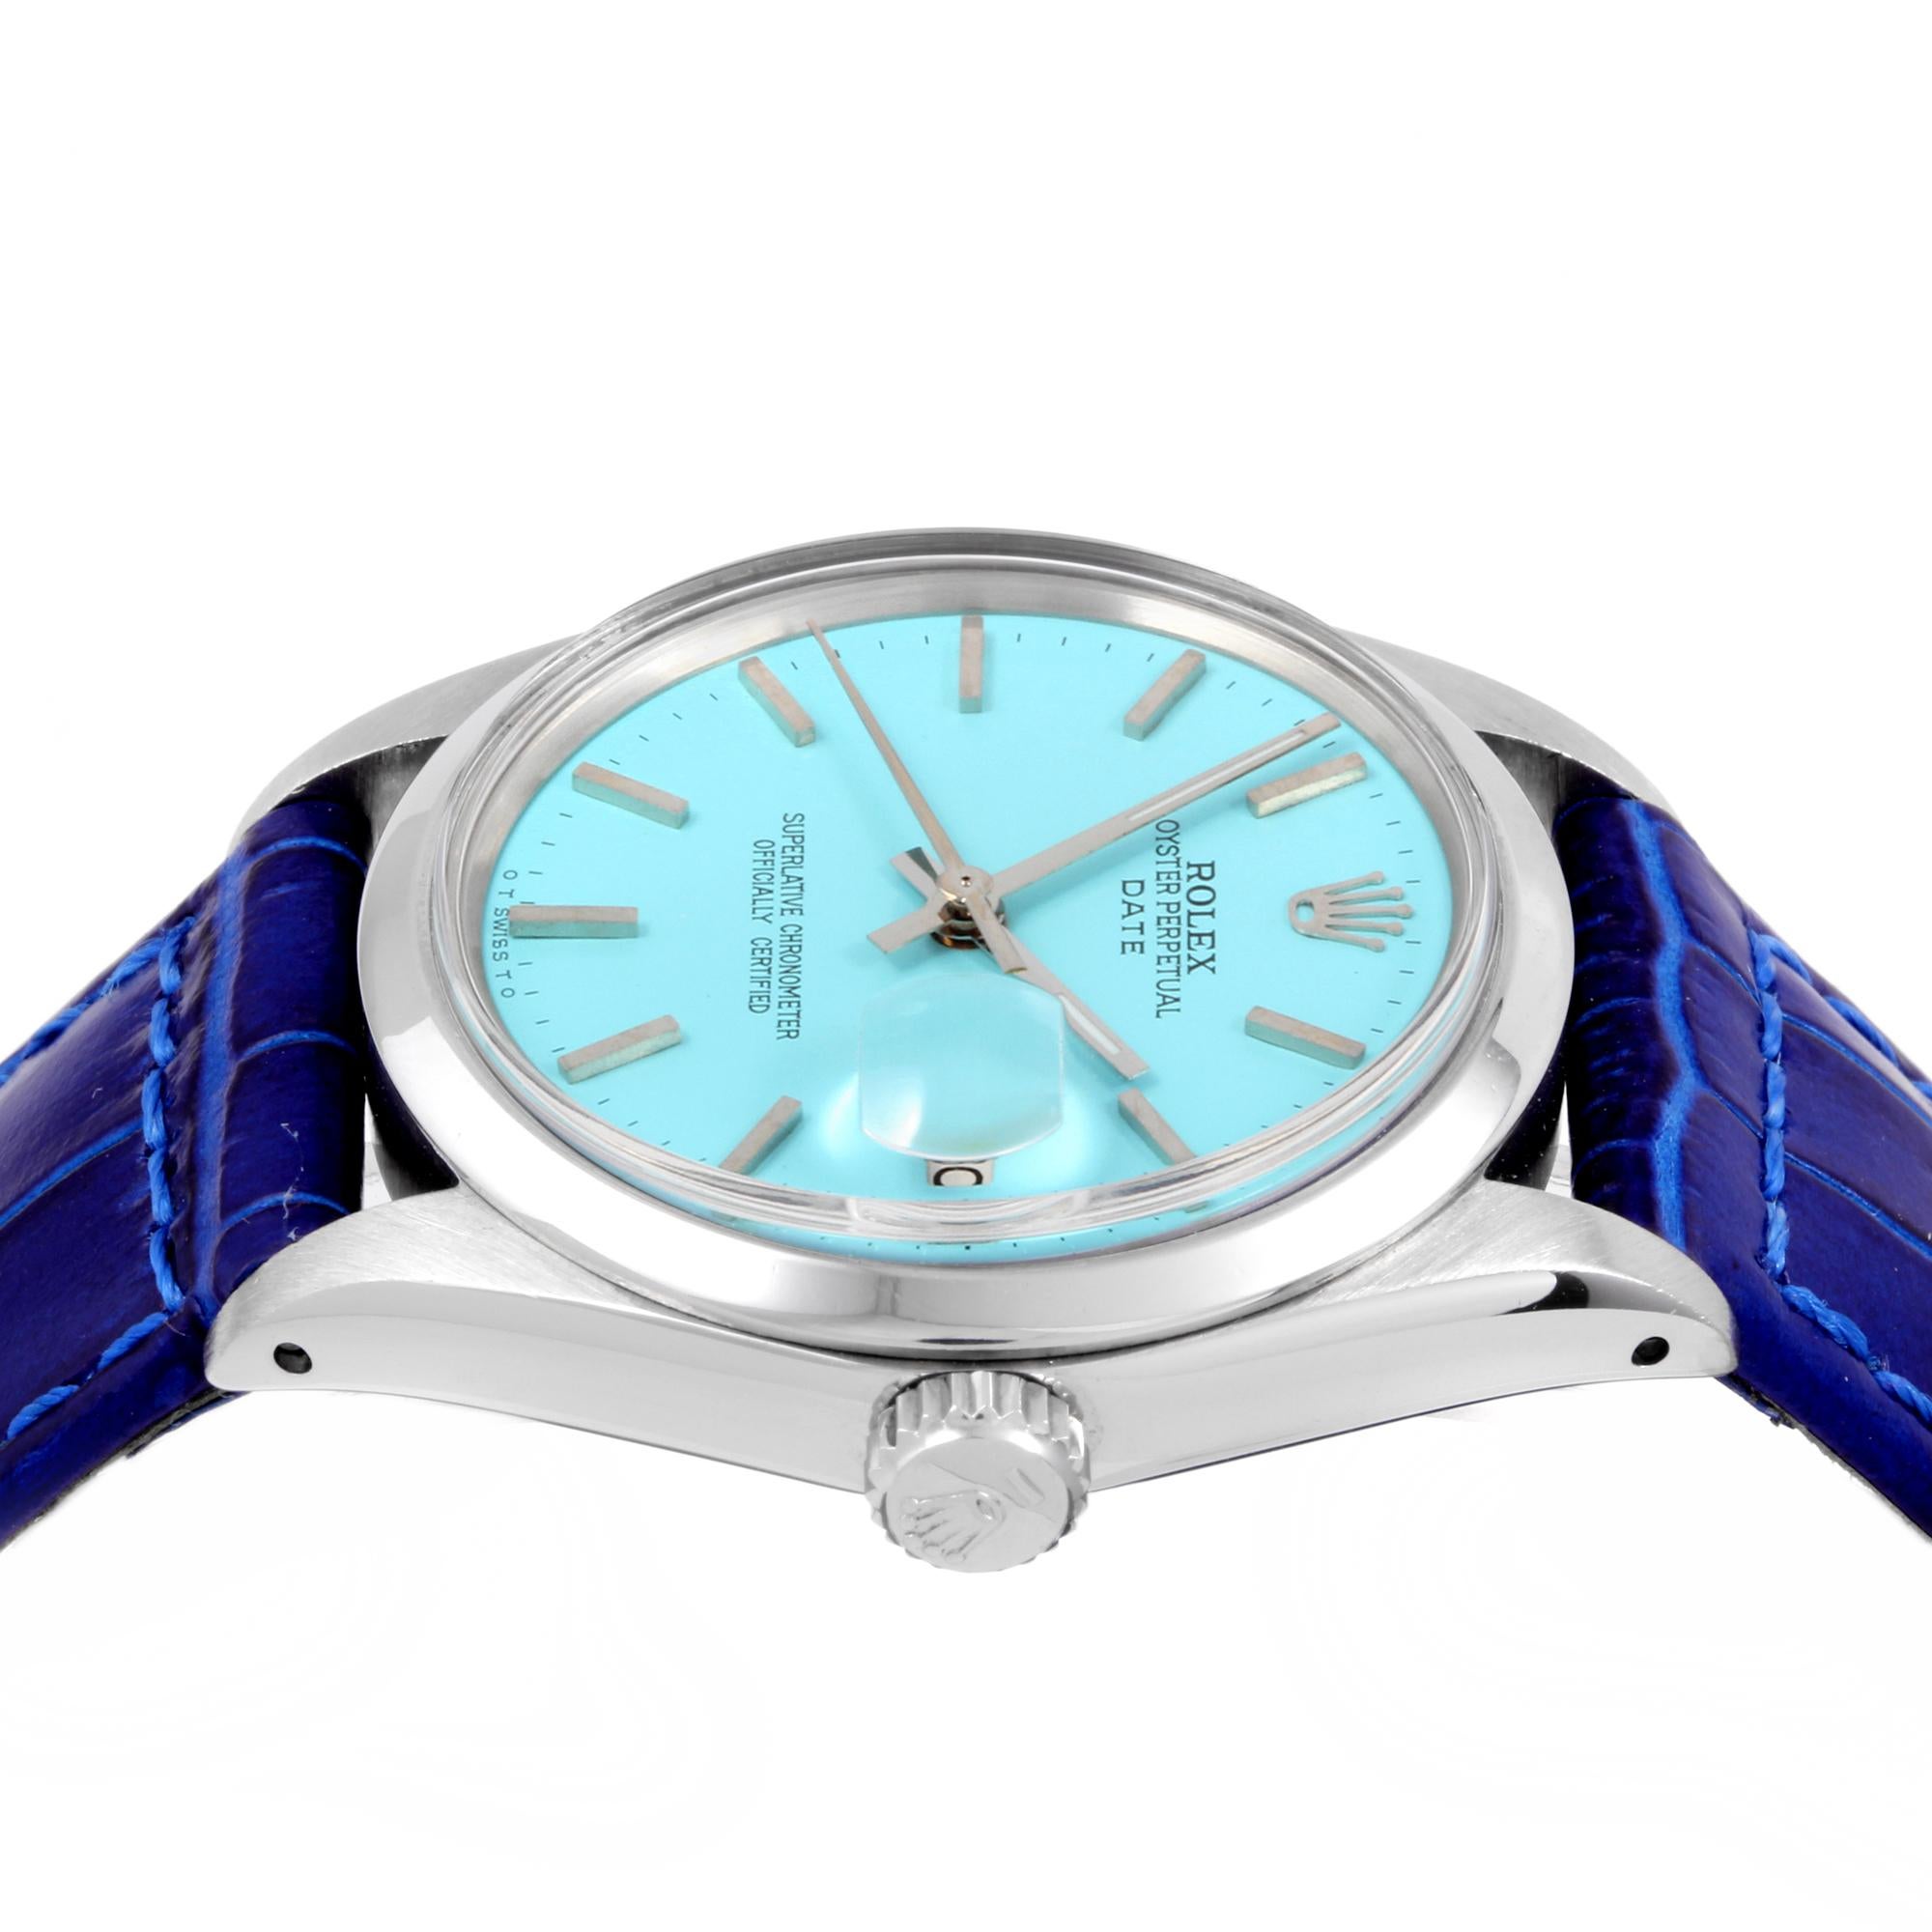 Brand - Rolex 
Model - 1500 (DATE)
Case size - 34mm
Bezel - Smooth Steel 
Crystal -Acrylic 
Metals - Steel 
Dial - Refinished Tiffany Tone 
Movement - Automatic CAL.1570
Band - Generic Blue Leather